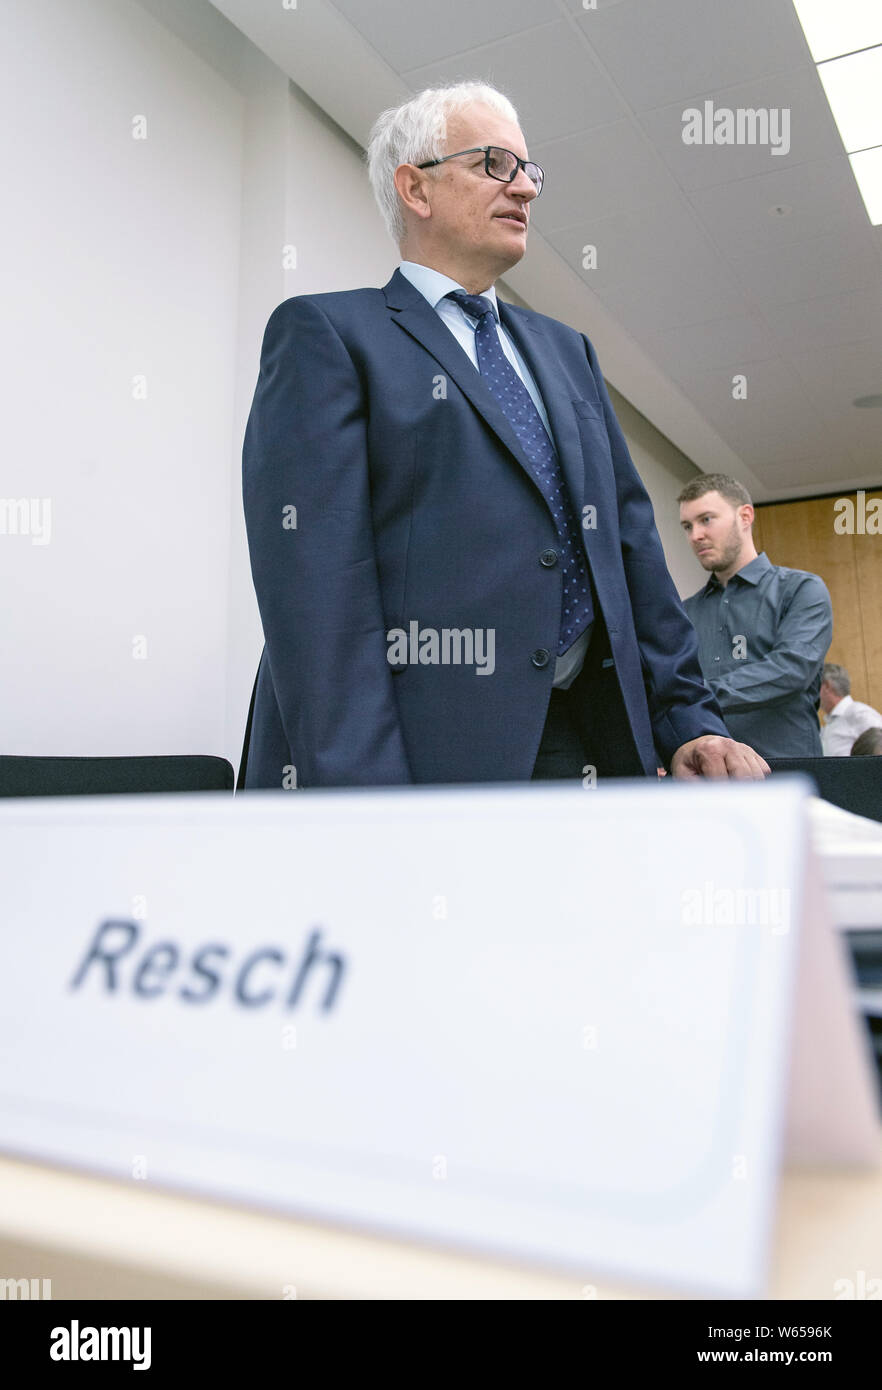 31 July 2019, North Rhine-Westphalia, Münster: Jürgen Resch, Federal Managing Director of Deutsche Umwelthilfe, is about to stand trial in the courtroom. The Higher Administrative Court of North Rhine-Westphalia is hearing the action brought by Deutsche Umwelthilfe (German Environmental Aid) against the city of Aachen for the continuation of the Cologne district government's air pollution control plans. The aim is to take measures to ensure that the limit values for nitrogen dioxide are complied with as quickly as possible. Photo: Guido Kirchner/dpa Stock Photo